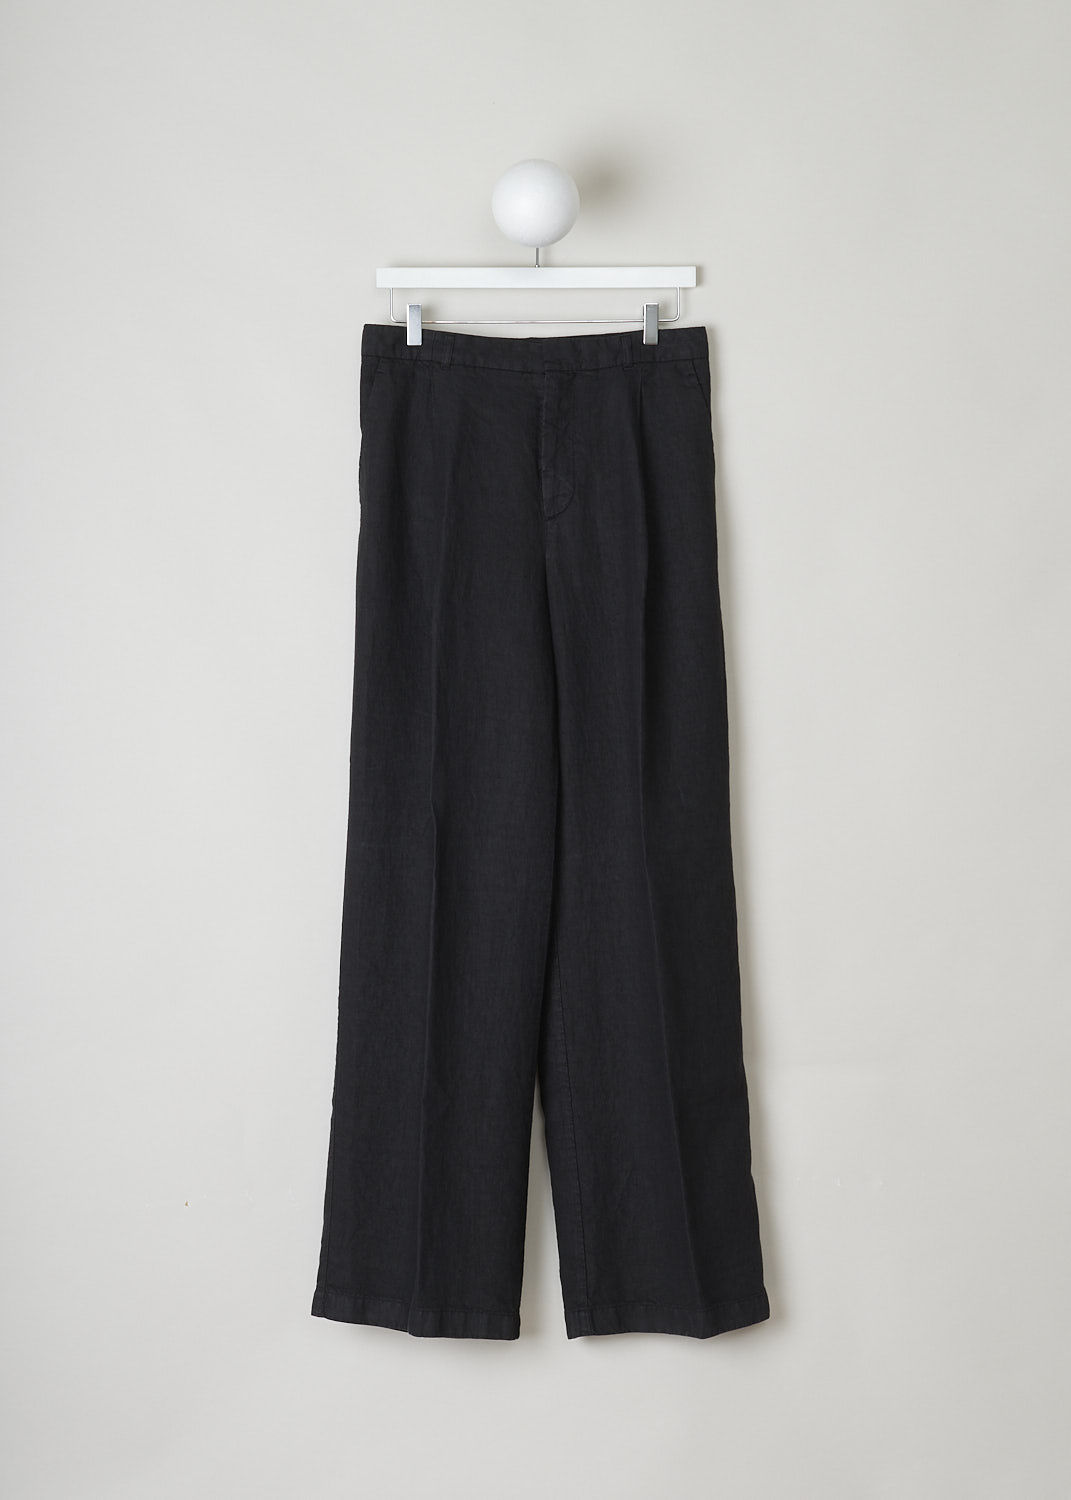 ASPESI, BLACK LINEN PANTS WITH STRAIGHT WIDE LEGS, H108_C253_85241, Black, Front, These black linen pants have a narrow waistband with belt loops. The closure option is a concealed hook and zipper. The straight wide pant legs have centre pleats The pants have forward slanted pockets in the front and buttoned welt pockets in the back.

